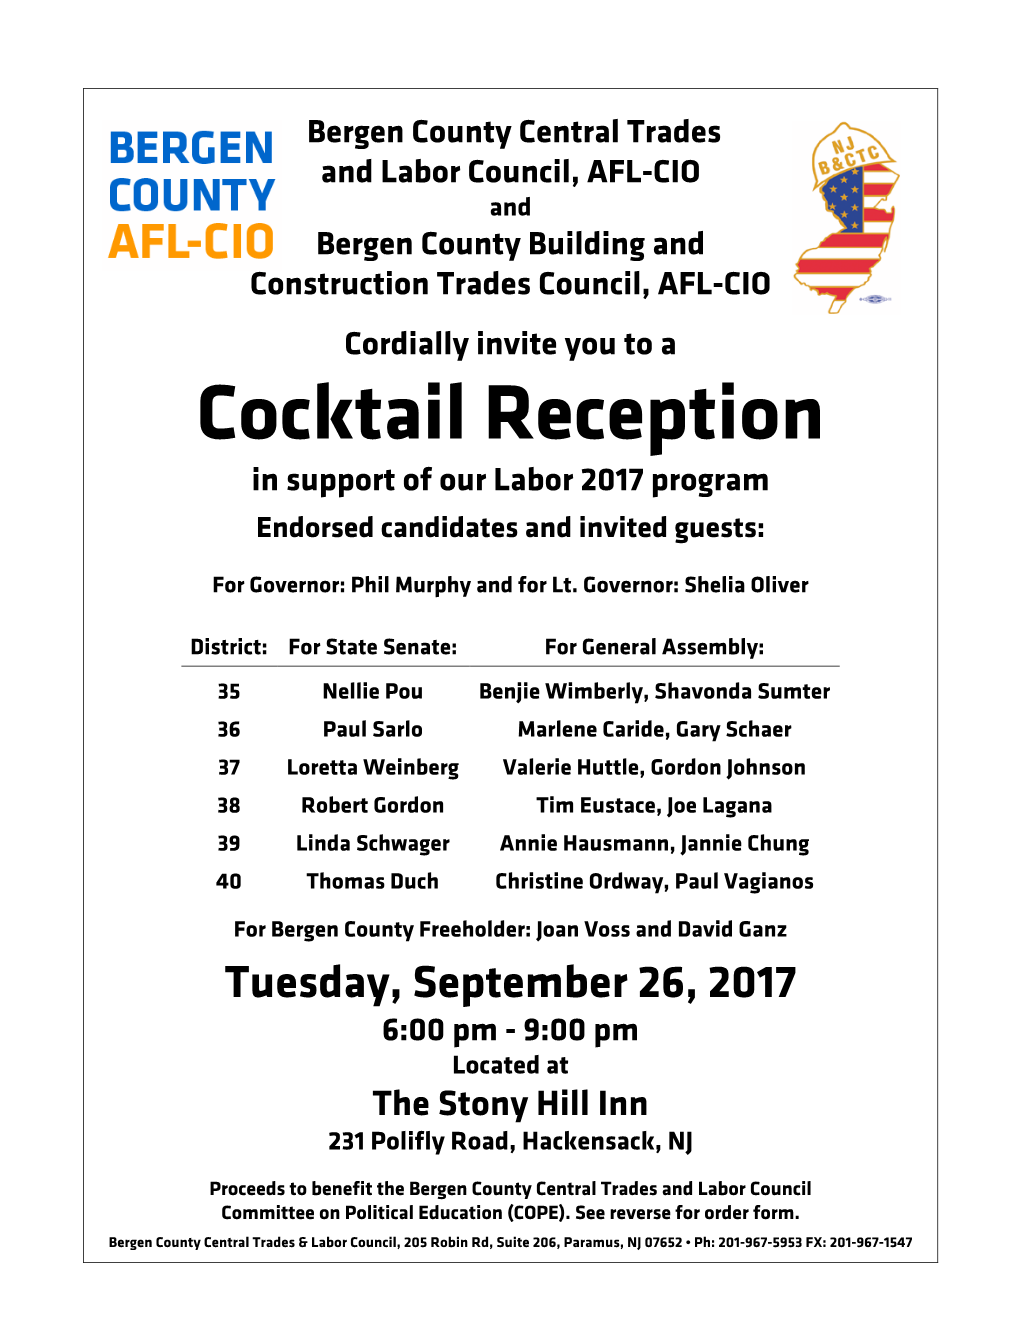 Cocktail Reception in Support of Our Labor 2017 Program Endorsed Candidates and Invited Guests